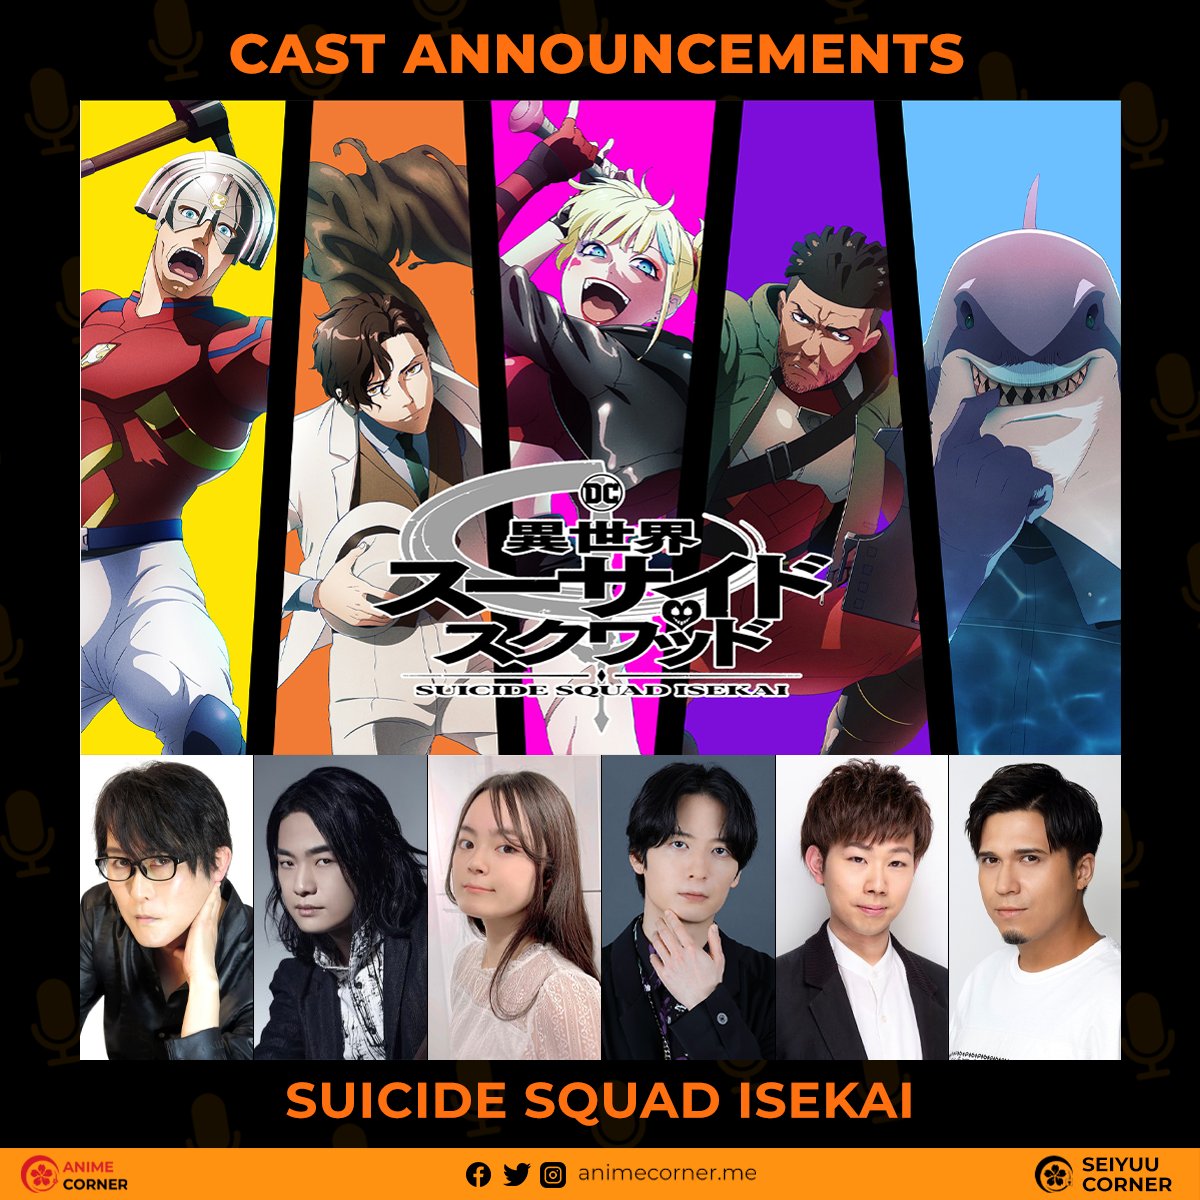 Suicide Squad Isekai' — Trailers, Characters, and Everything We Know